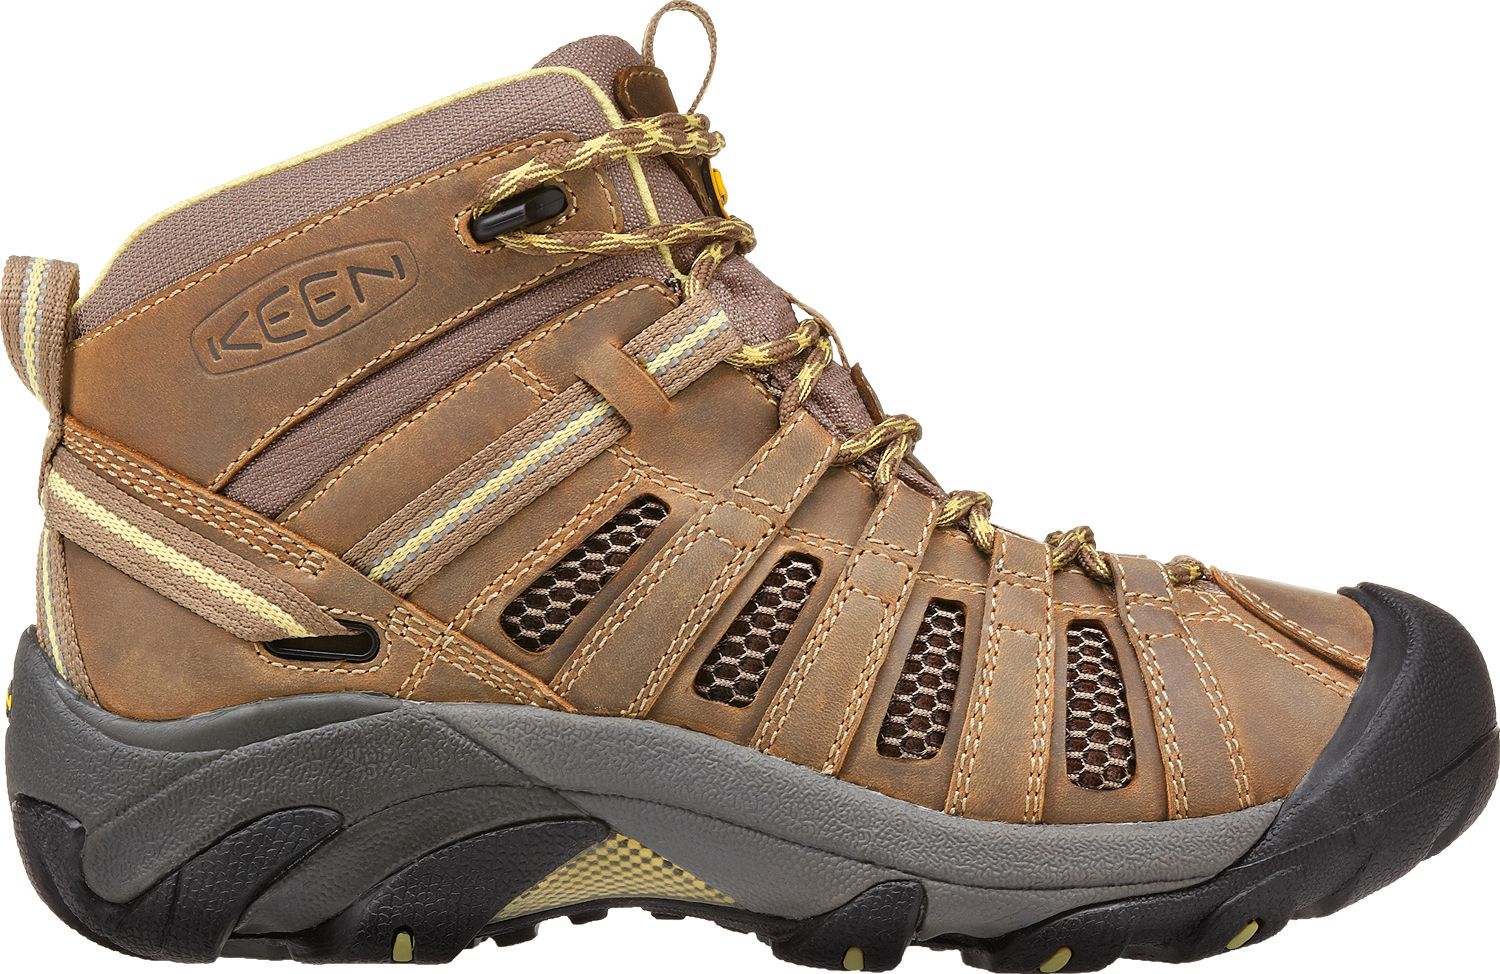 keen voyageur mid hiking boots